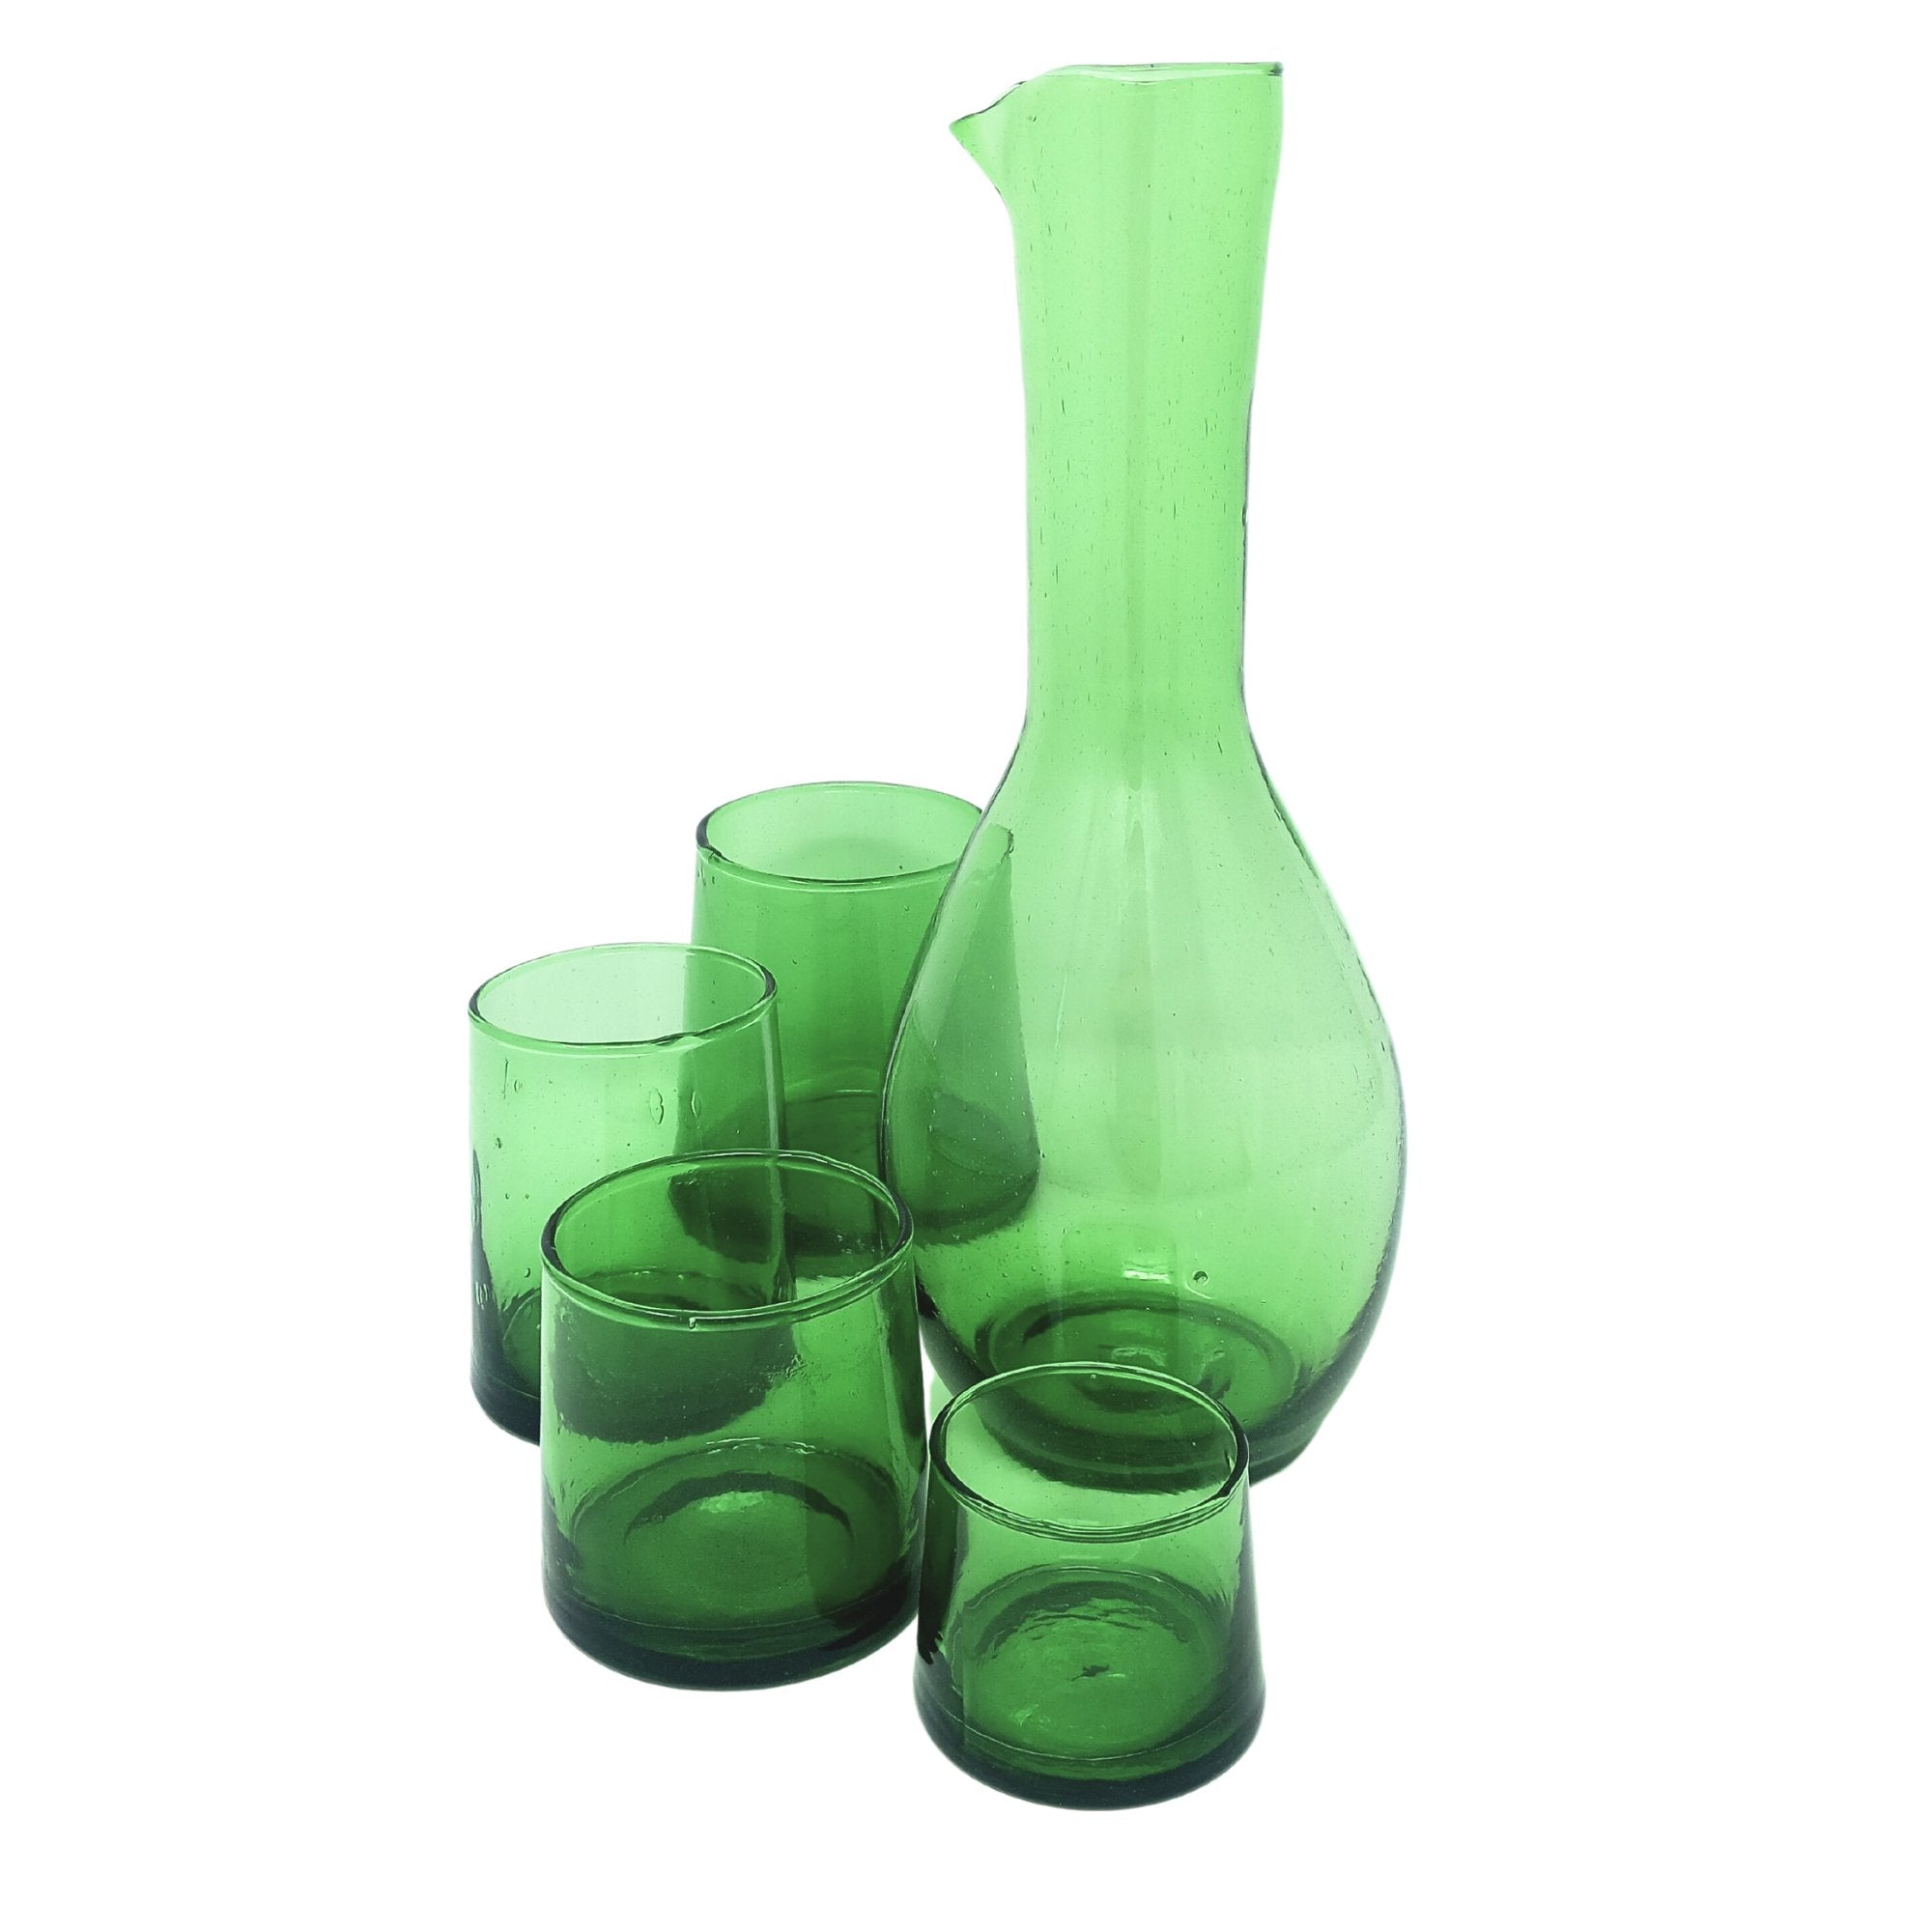 Inverted Recycled Drinking Glass Green - Artisan Stories